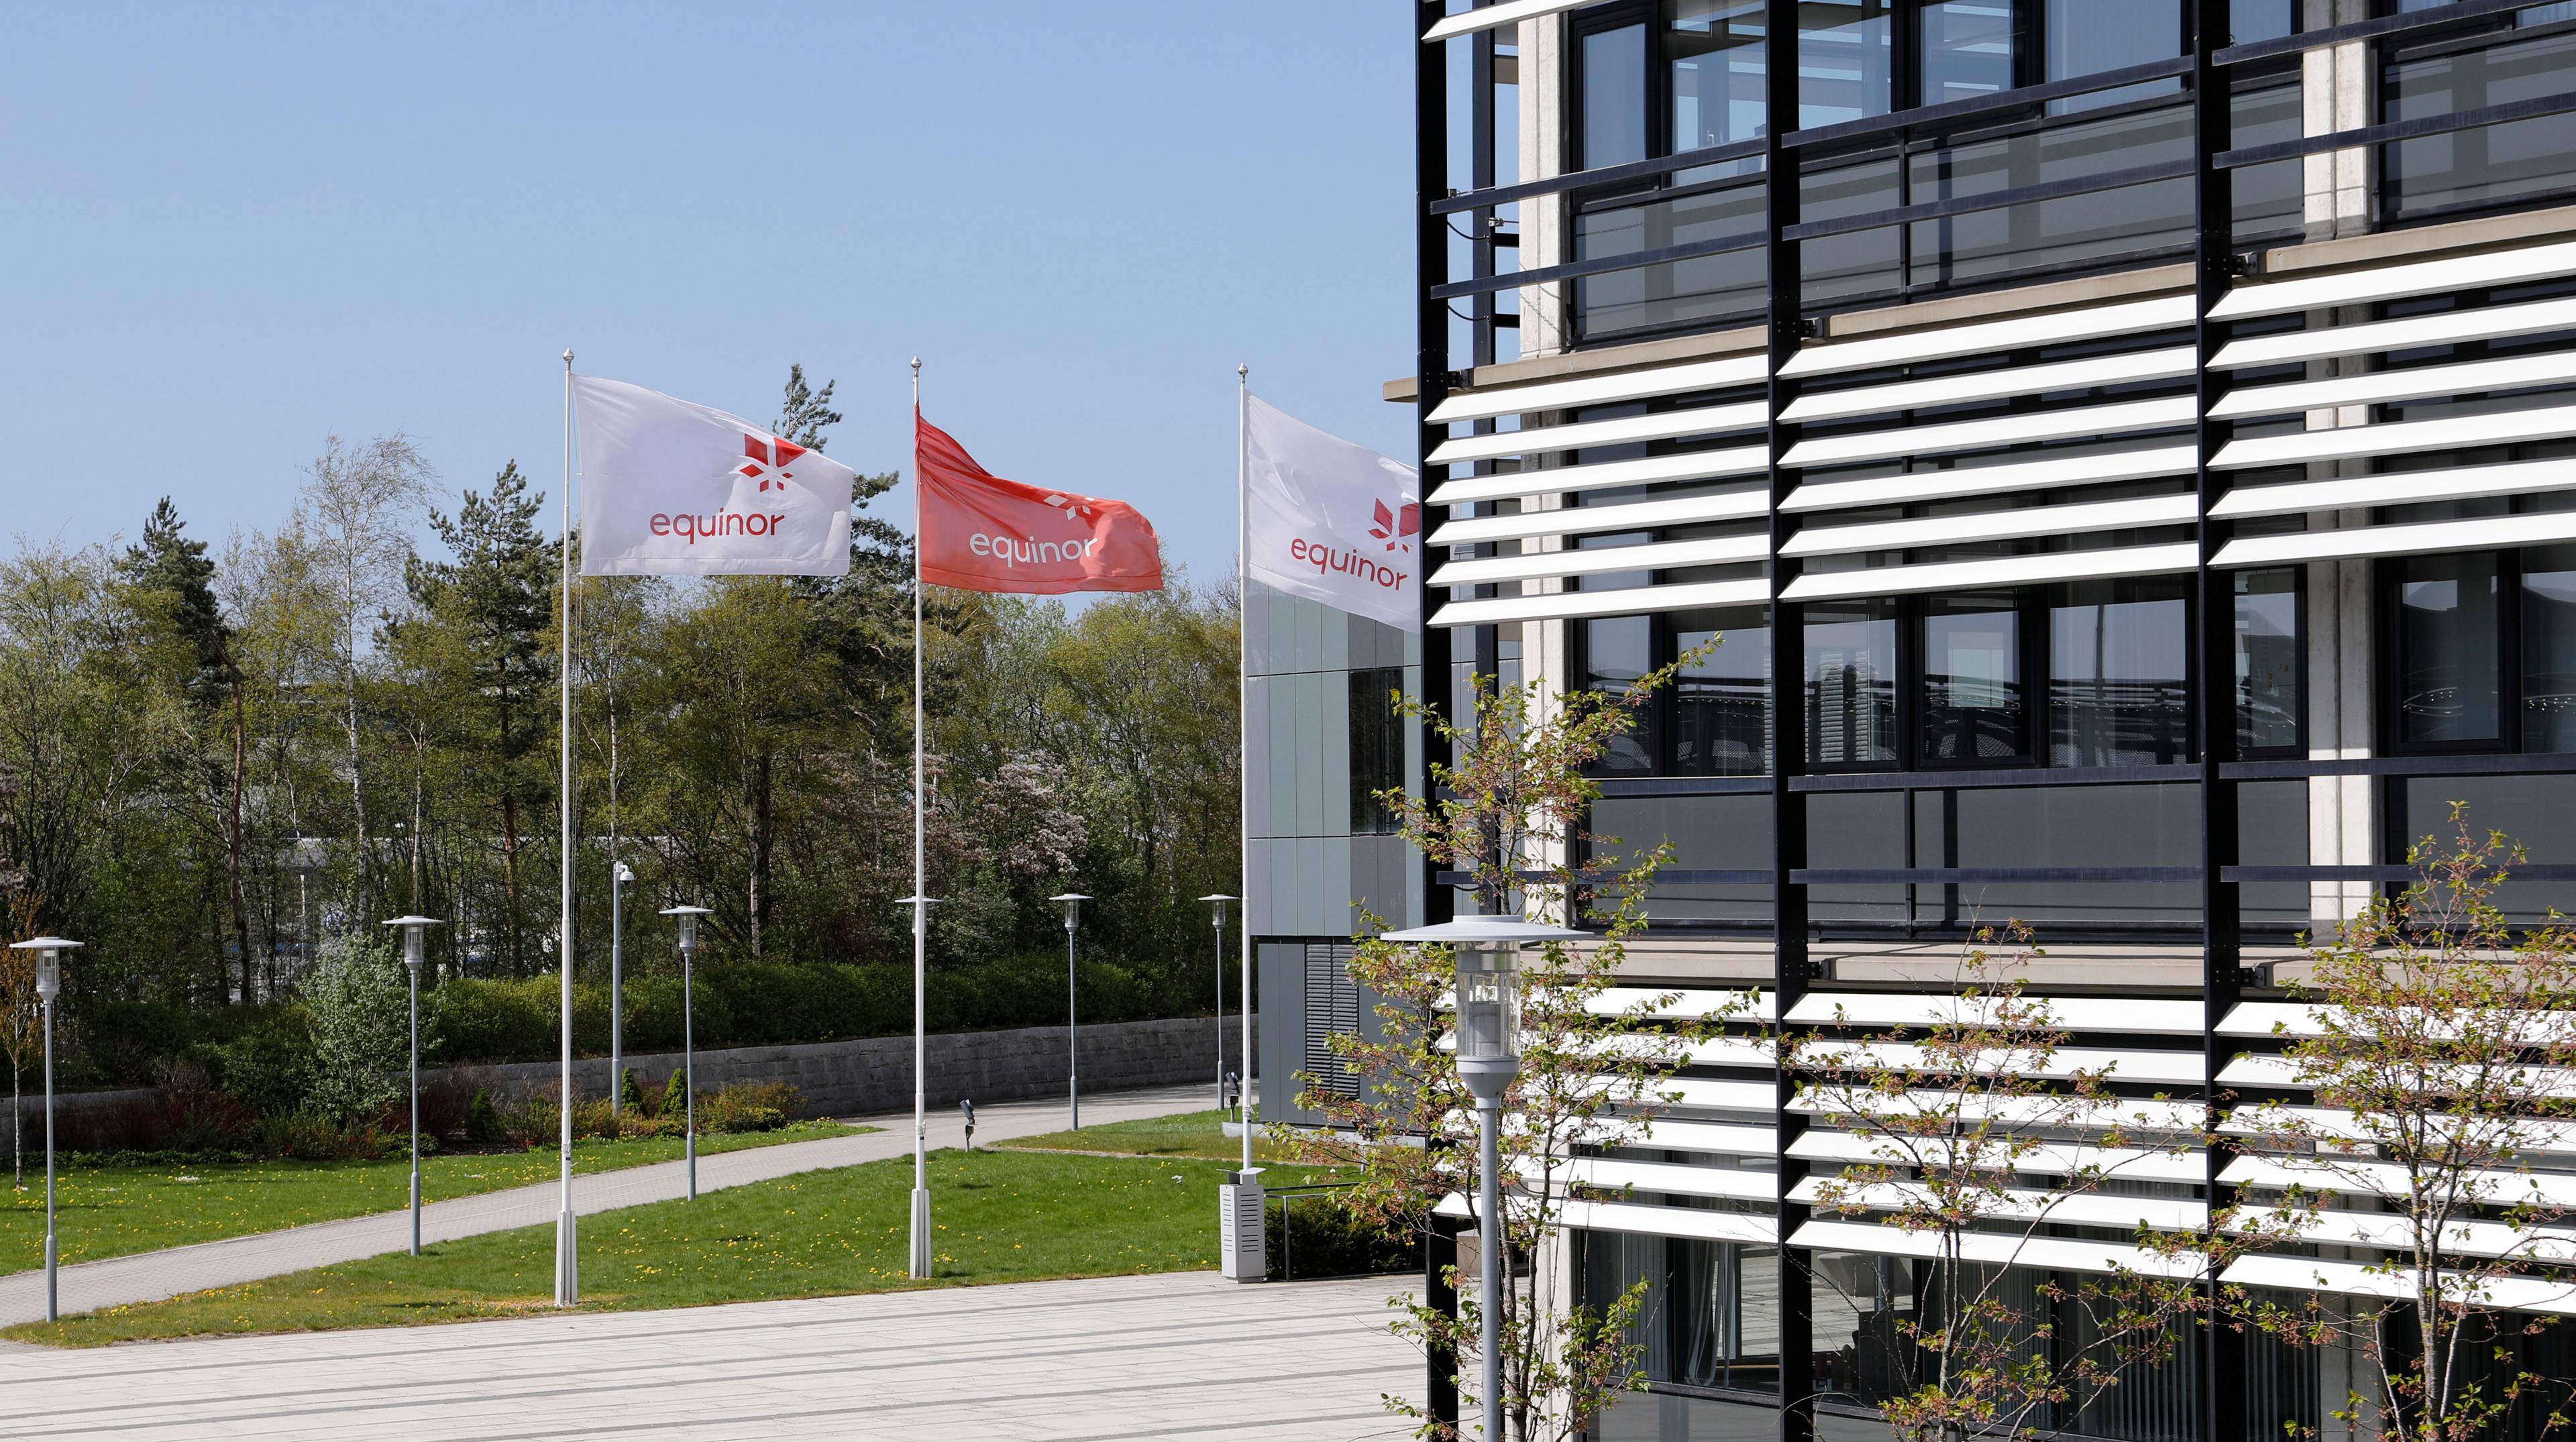 Equinor flags and office building